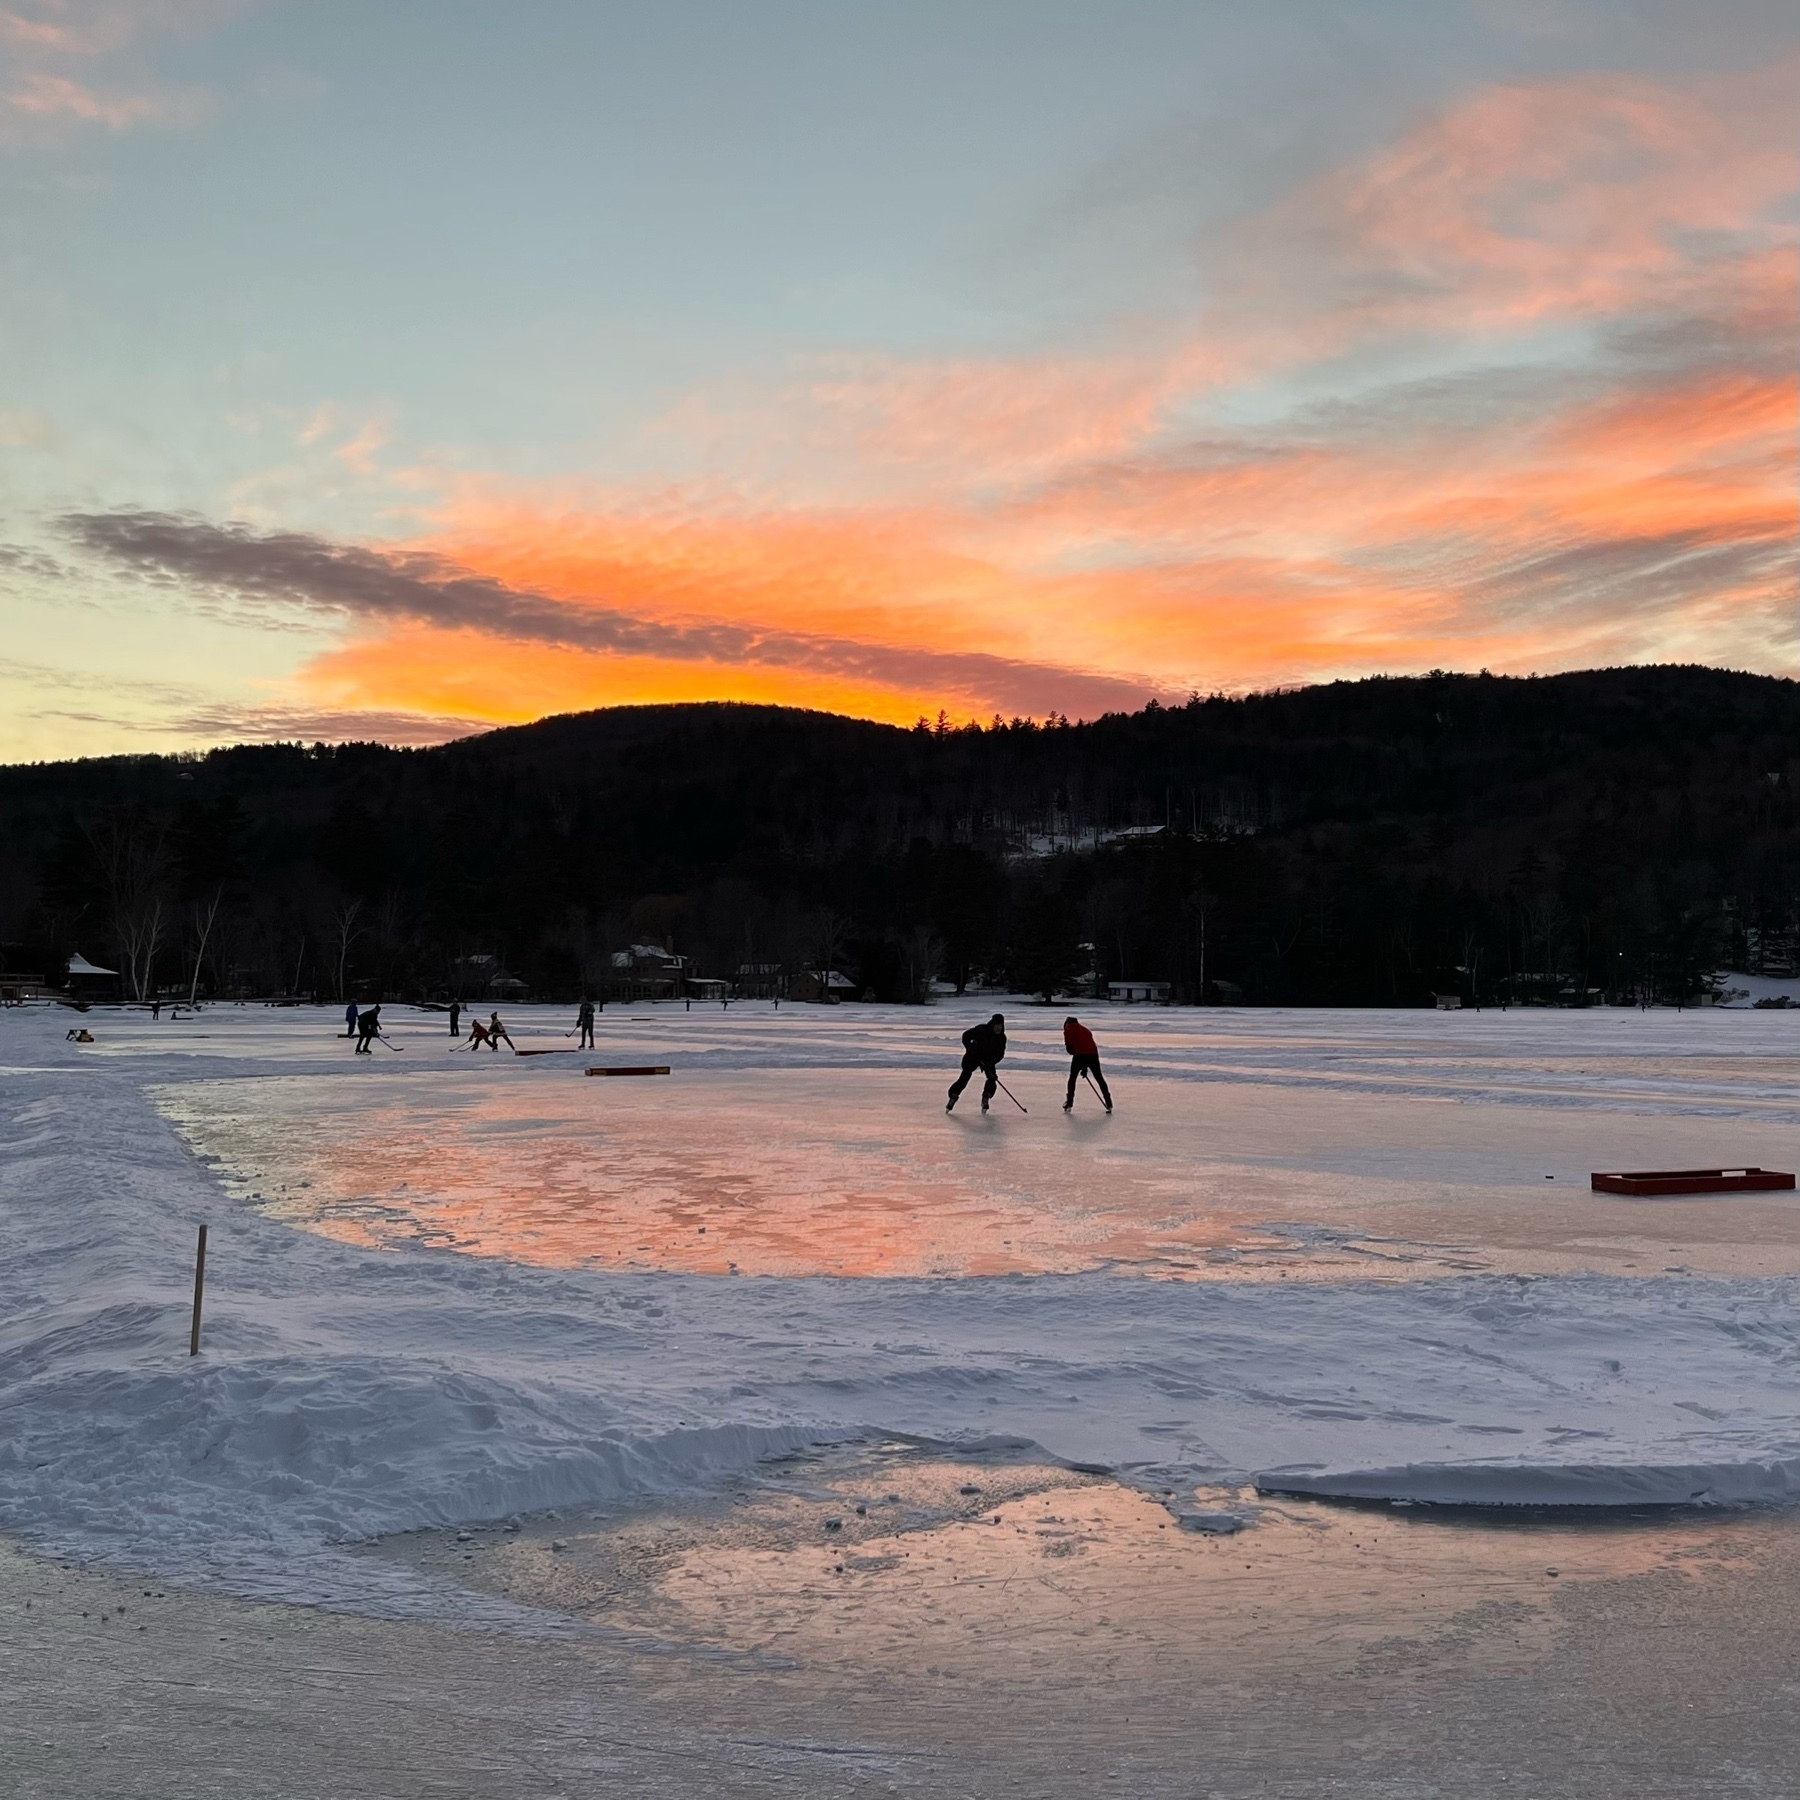 sunset picture on a frozen lake with hockey players and other skaters